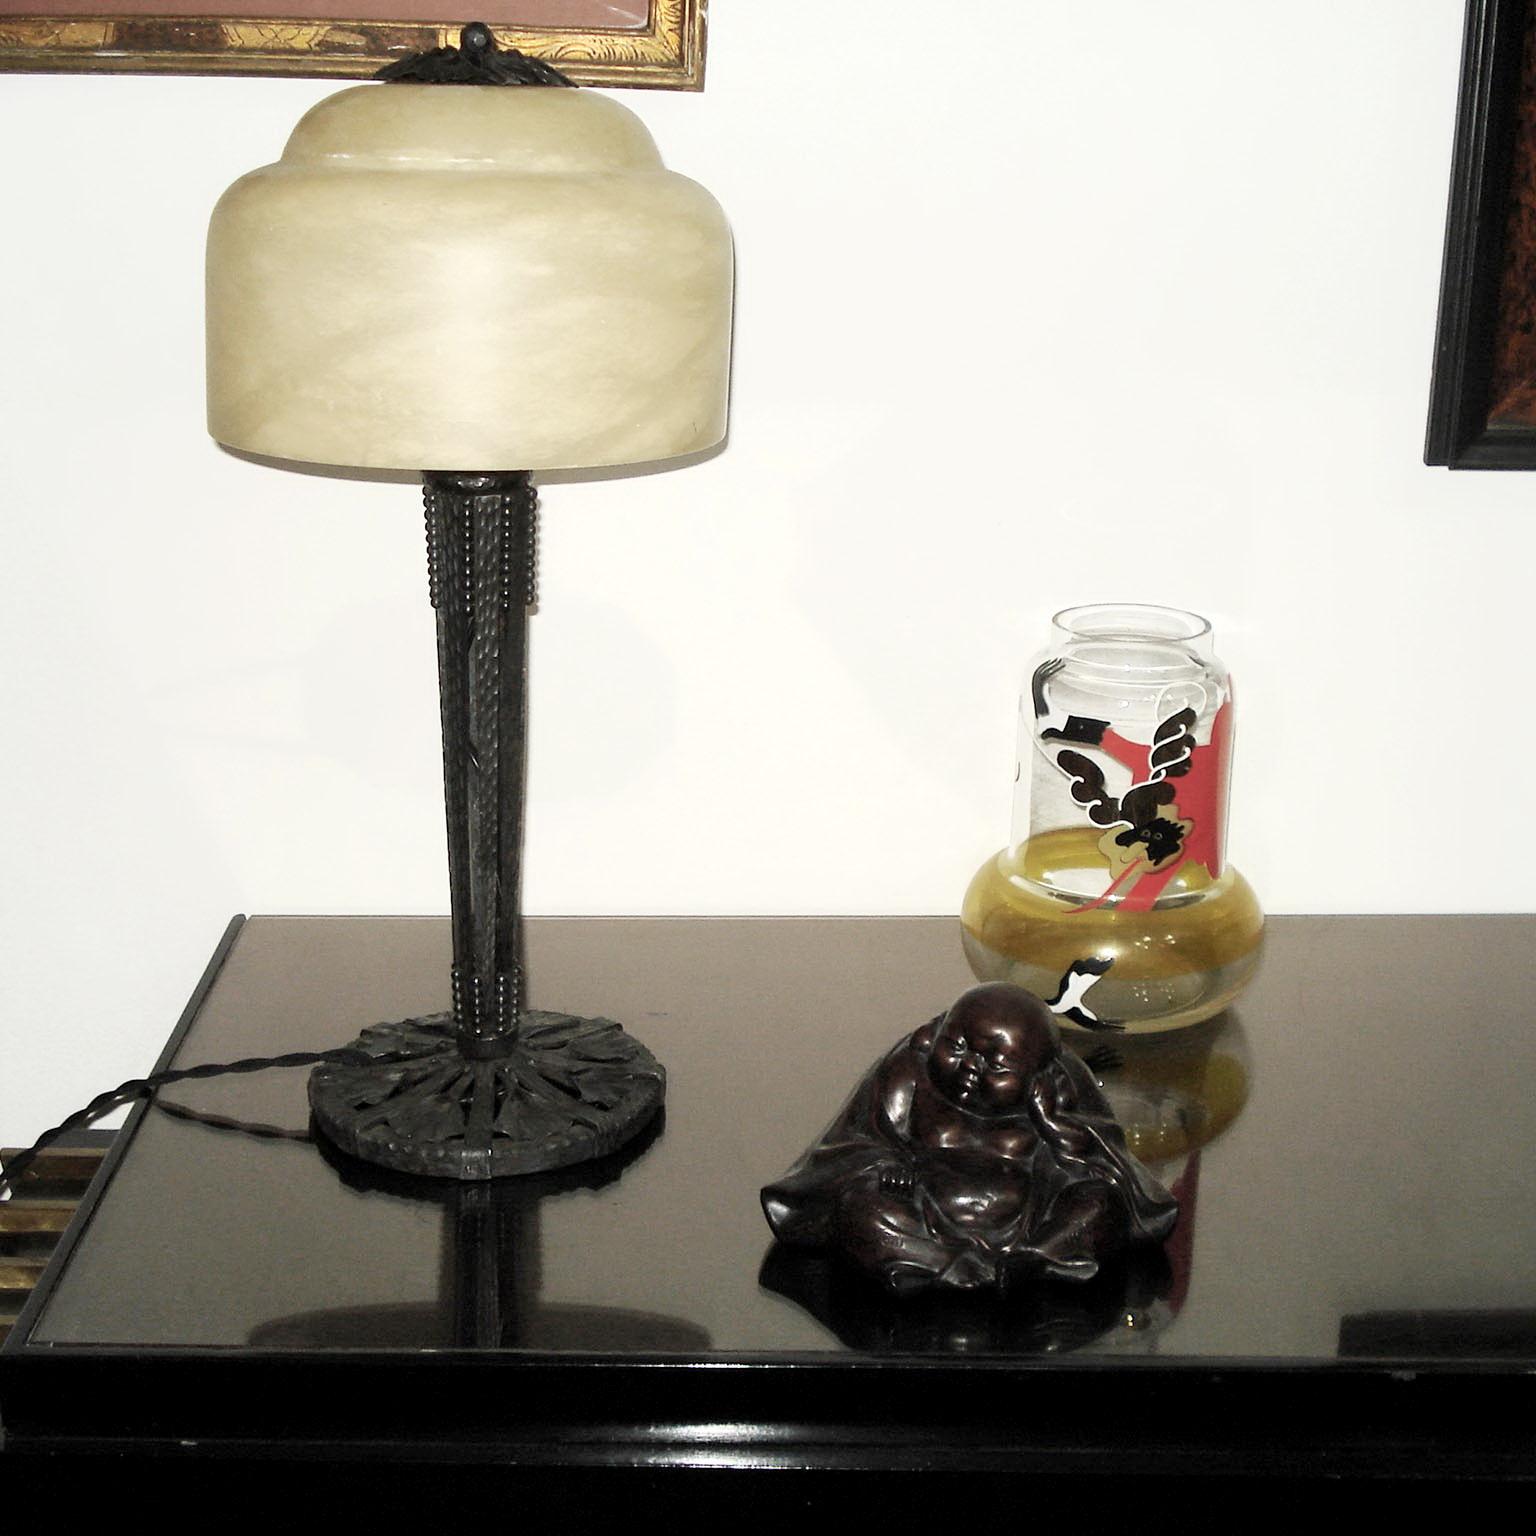 Table lamp by Edgar Brandt, made of wrought iron, with alabaster shade.
Ginkgo leaves motif. Stamped signature to the foot.
Dimensions:
Height 54 cm, diameter 23 cm
Cleaned and newly rewired.